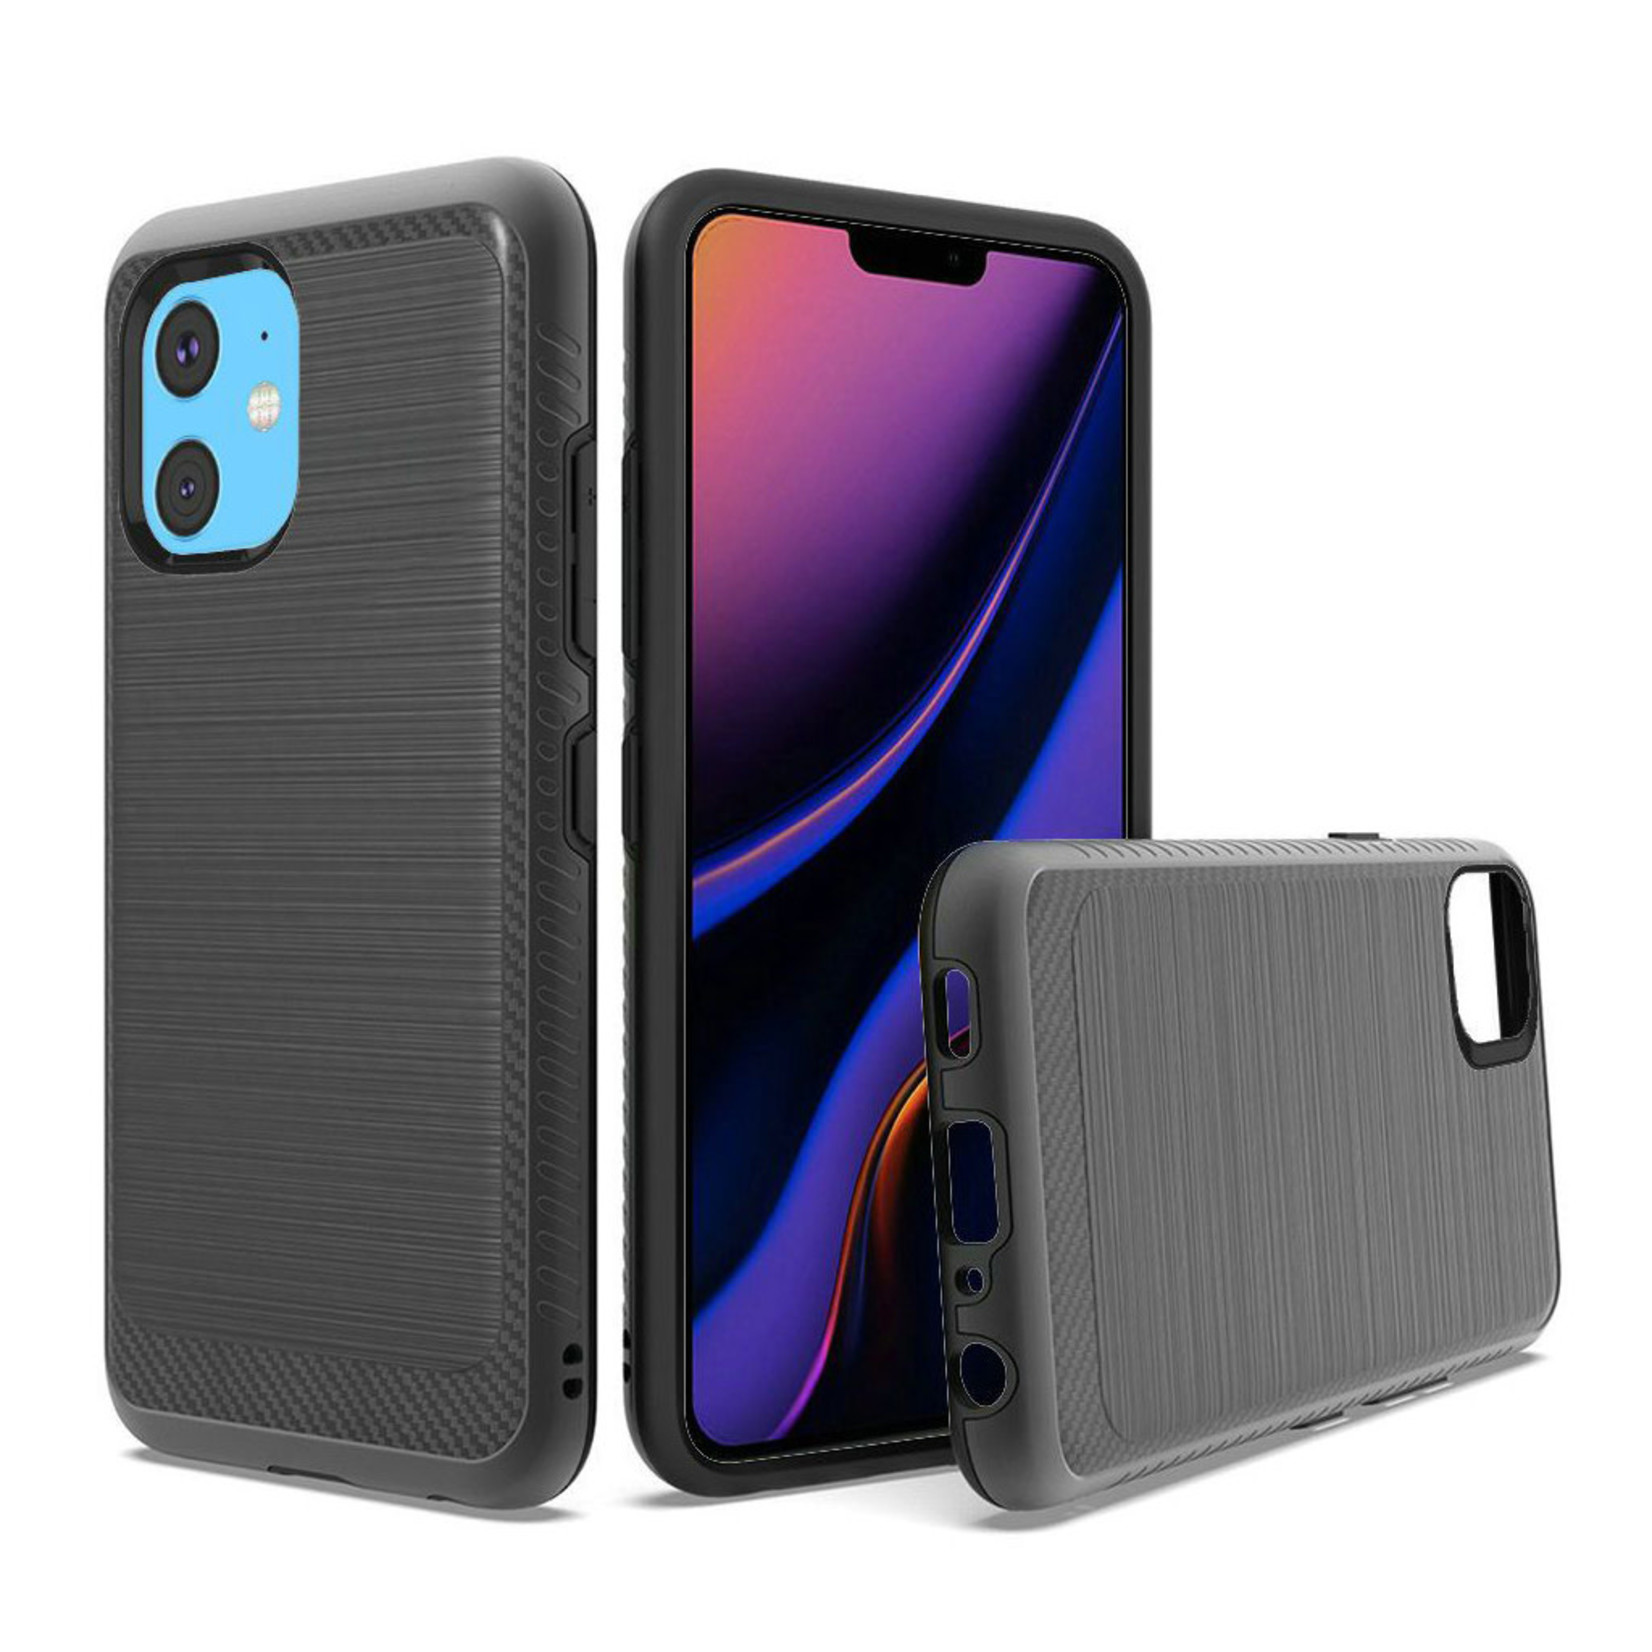 Metallic PC TPU Brushed Case with Carbon Fiber Edge for iPhone 11